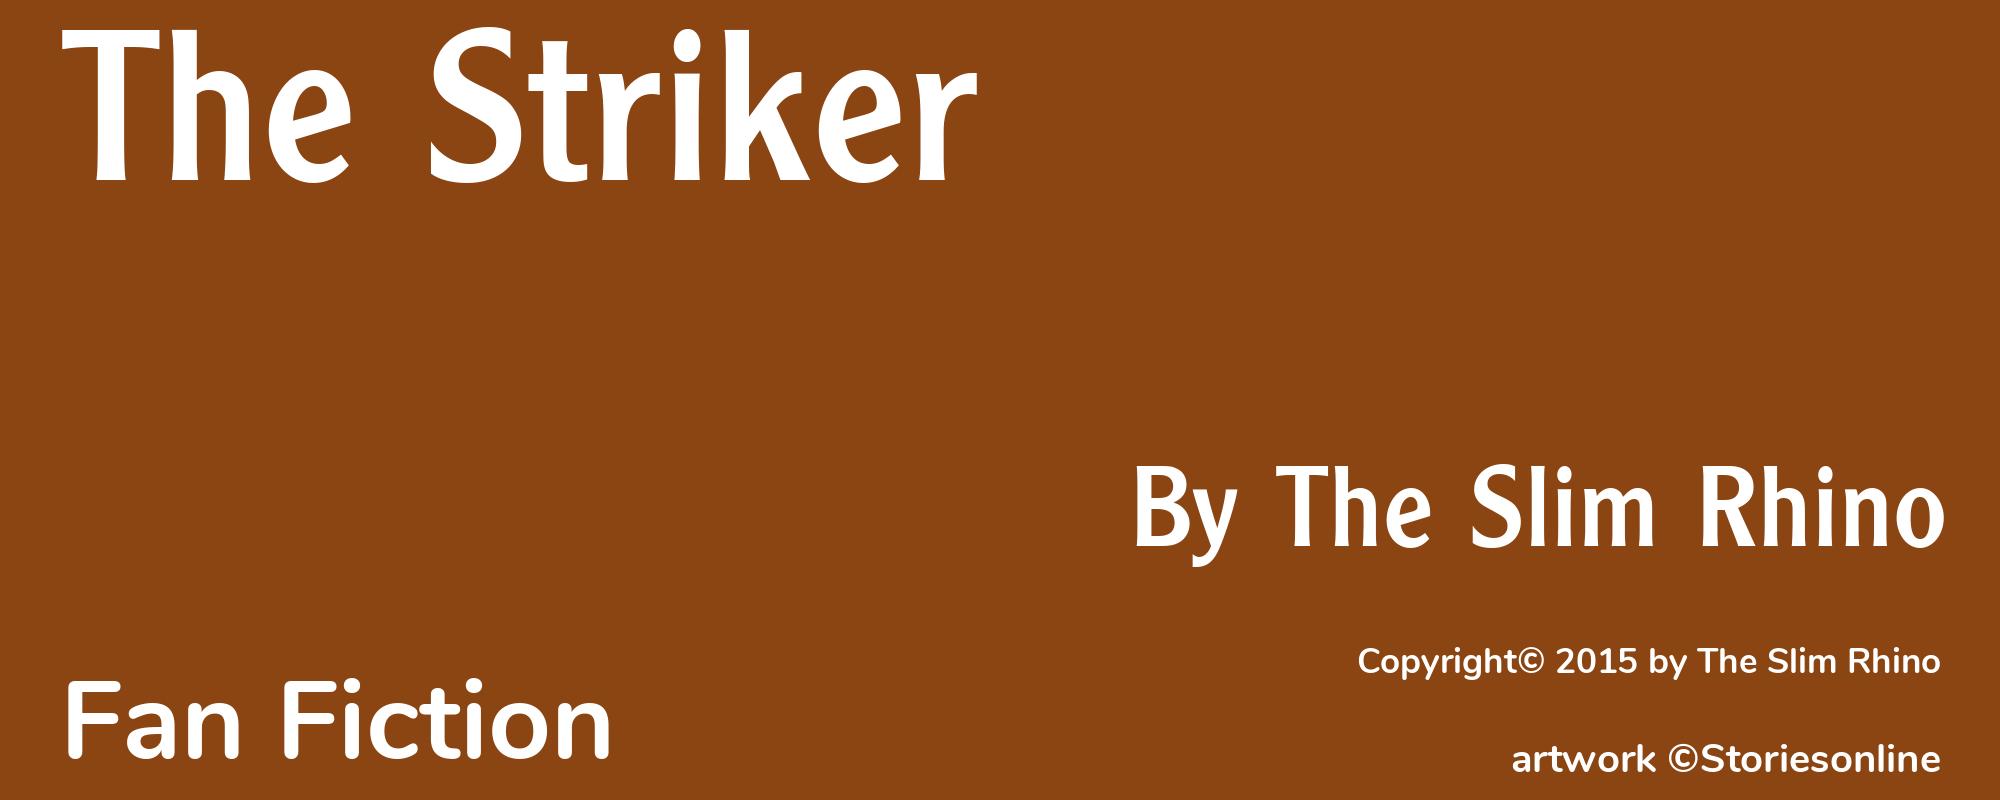 The Striker - Cover